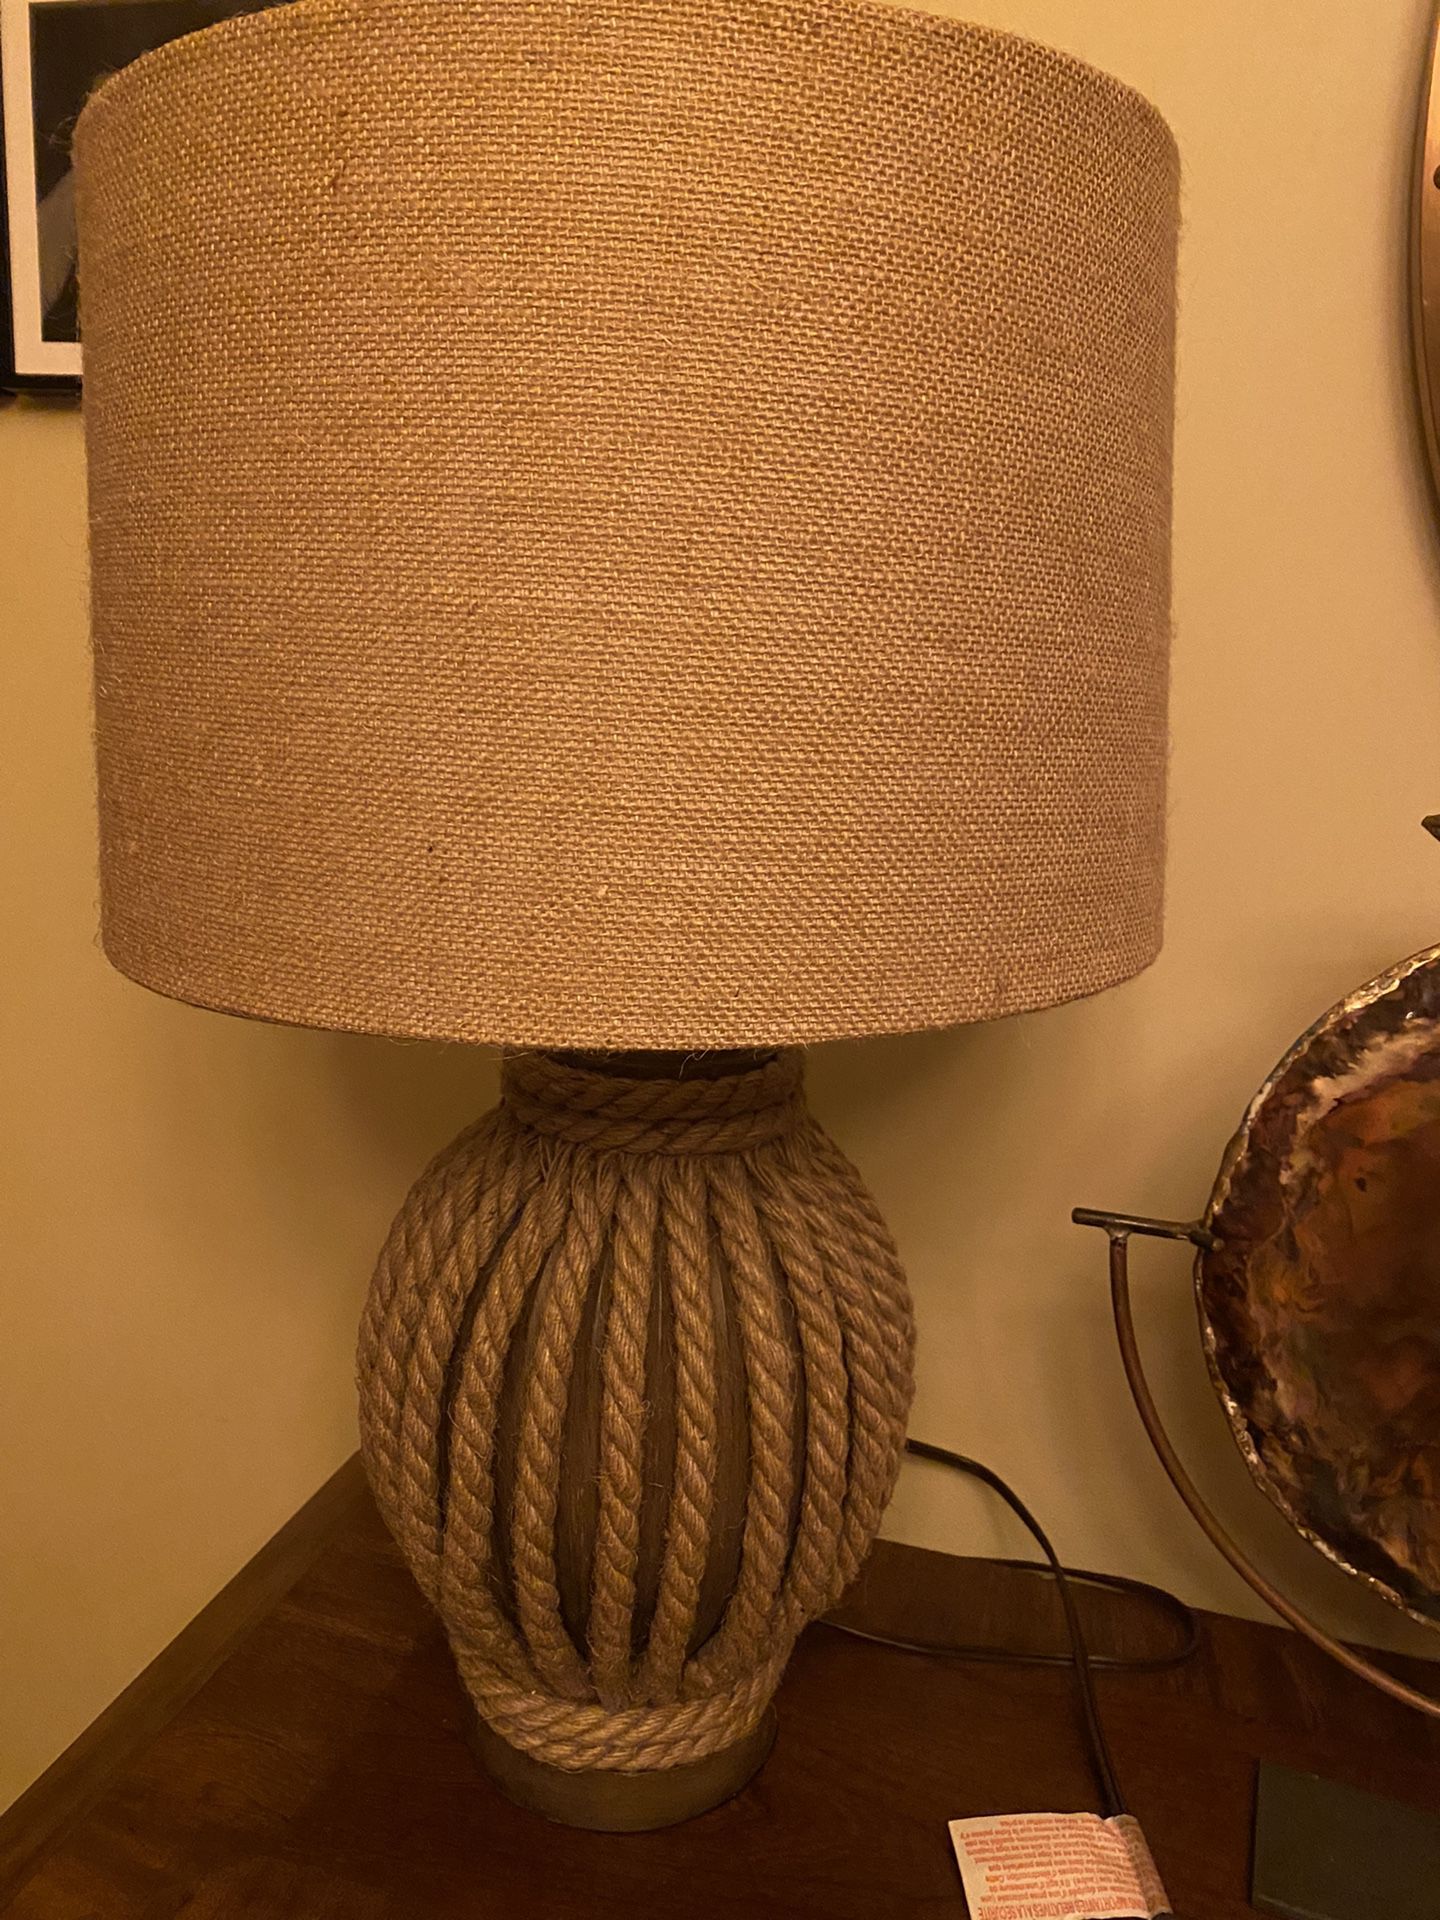 Two Rustic Rope Lamps